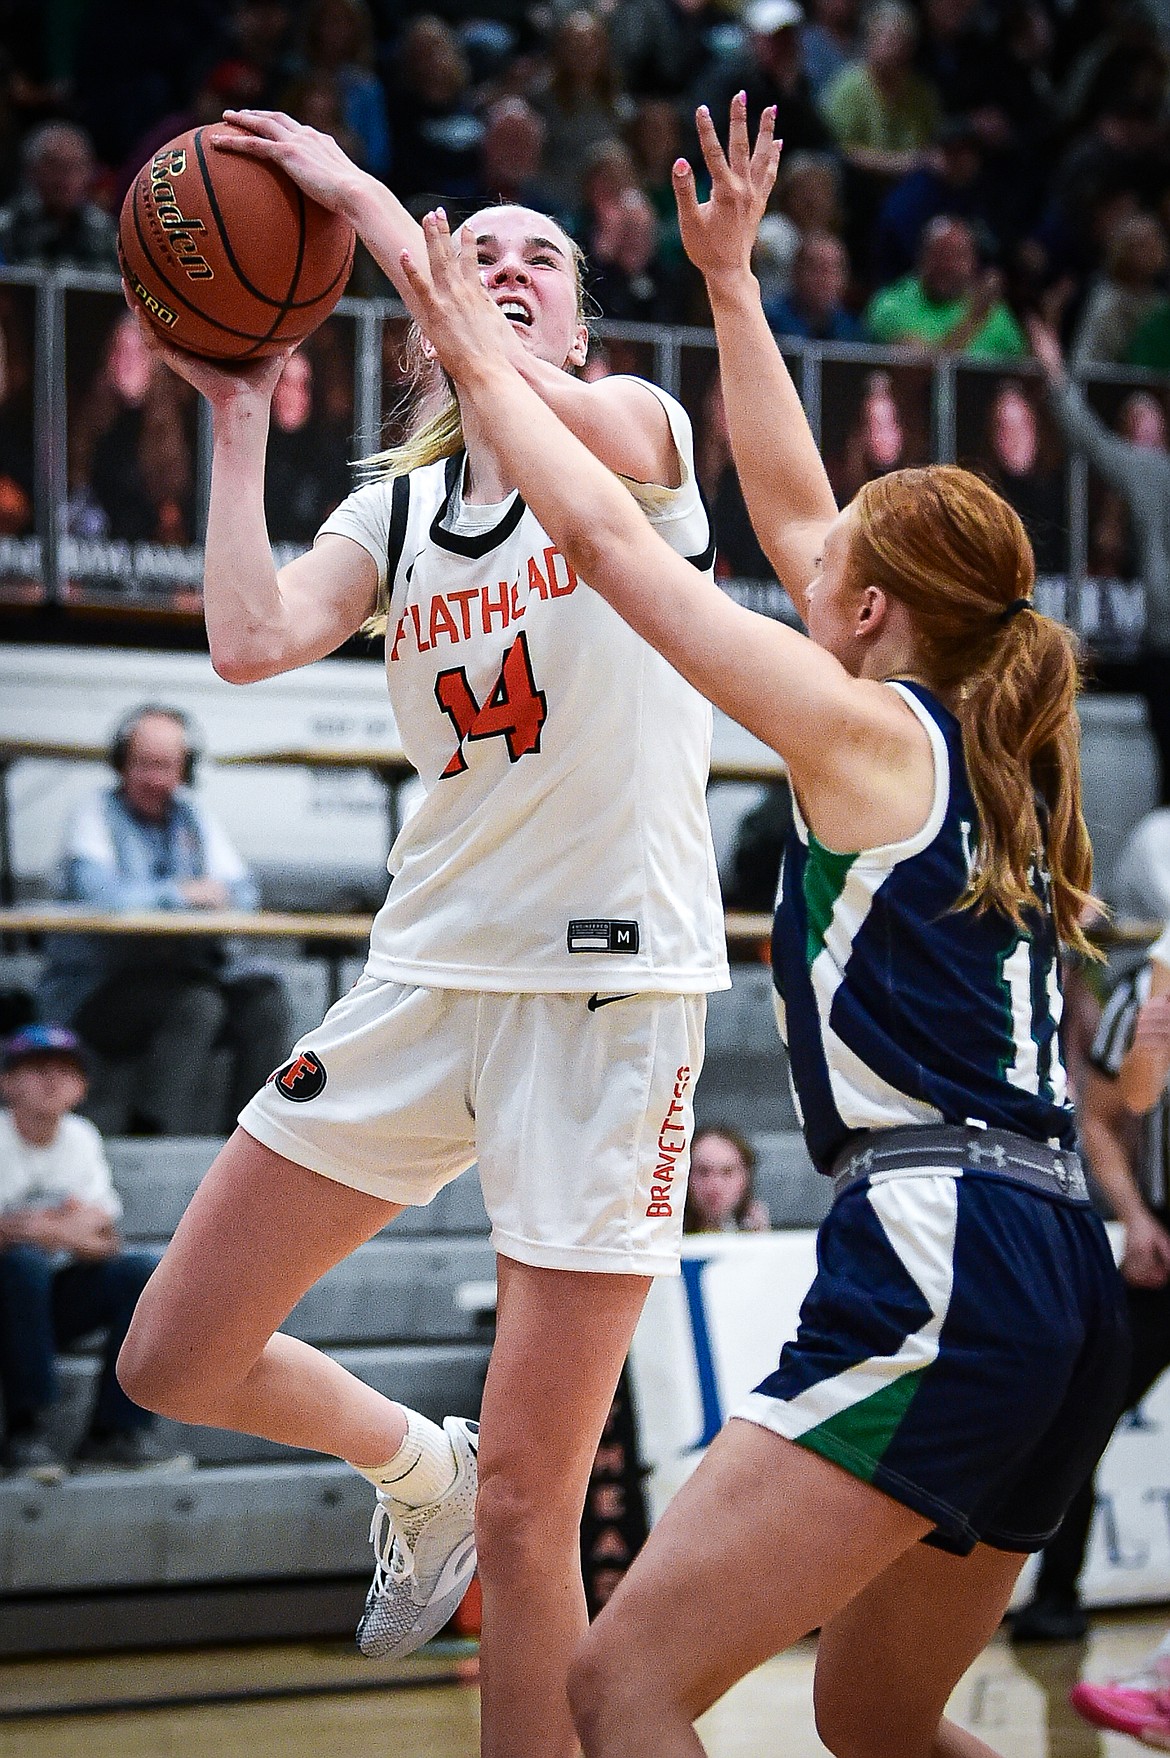 Flathead's Kennedy Moore (14) drives to the basket against Glacier's Kenedee Moore (11) at Flathead High School on Friday, Jan. 19. (Casey Kreider/Daily Inter Lake)